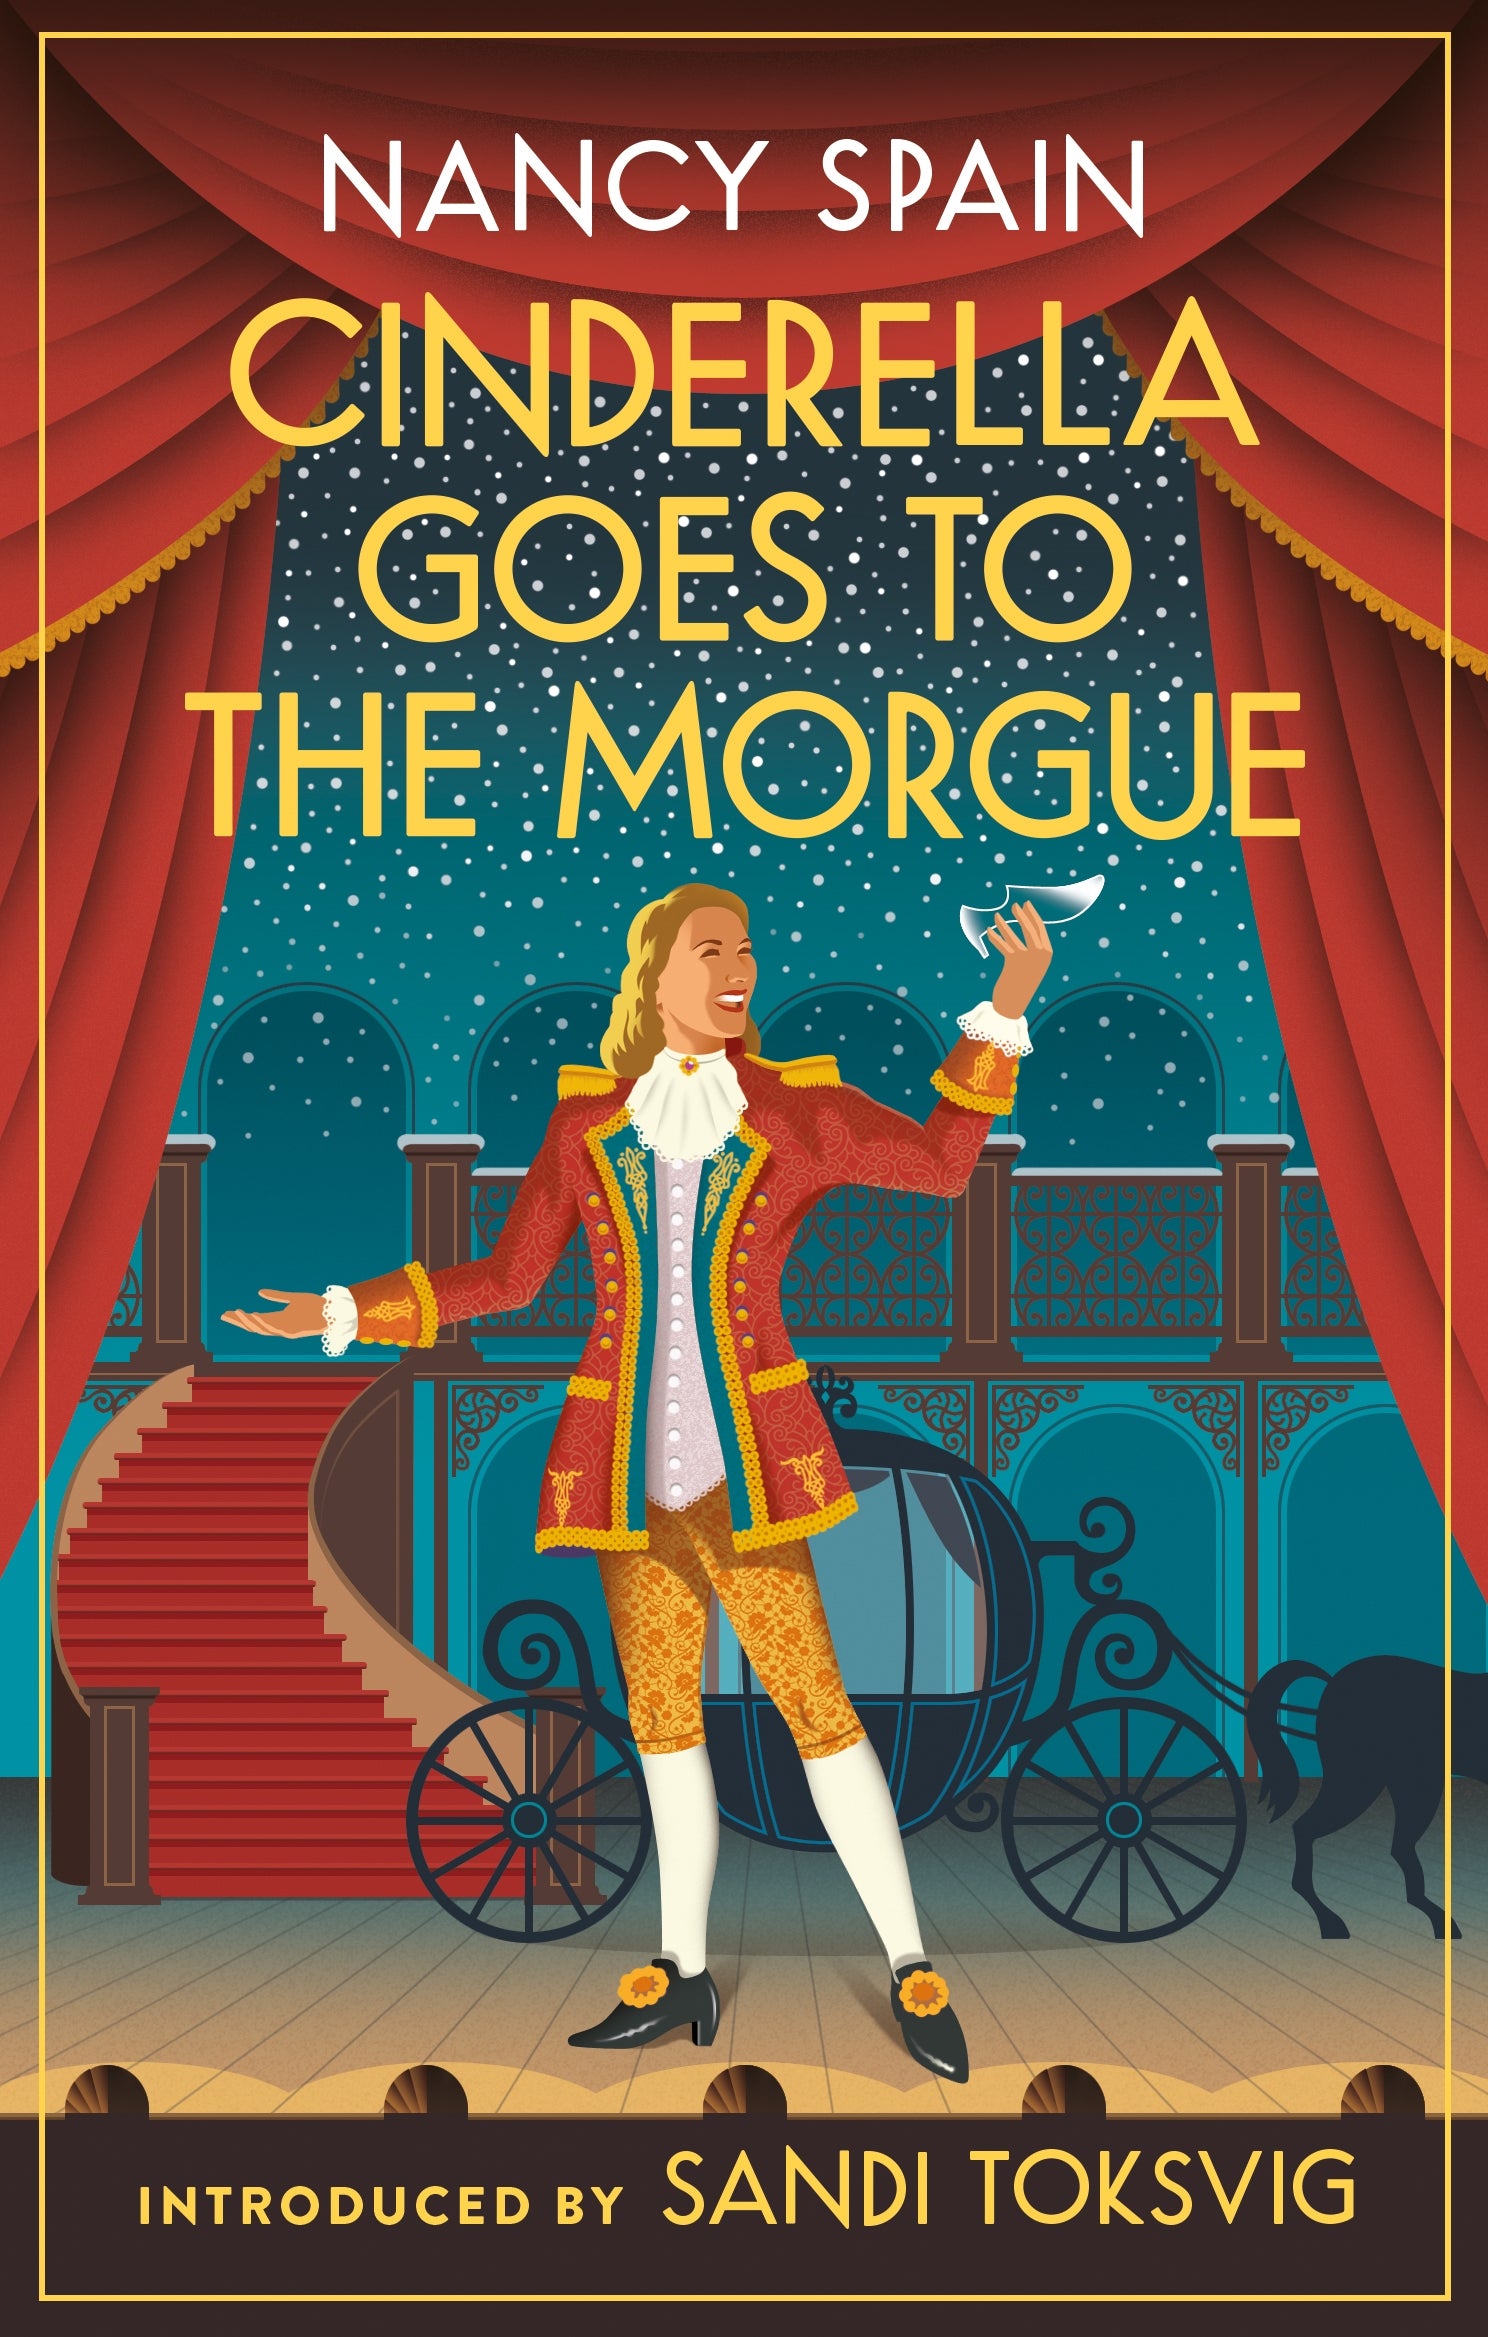 Cinderella Goes to the Morgue by Nancy Spain